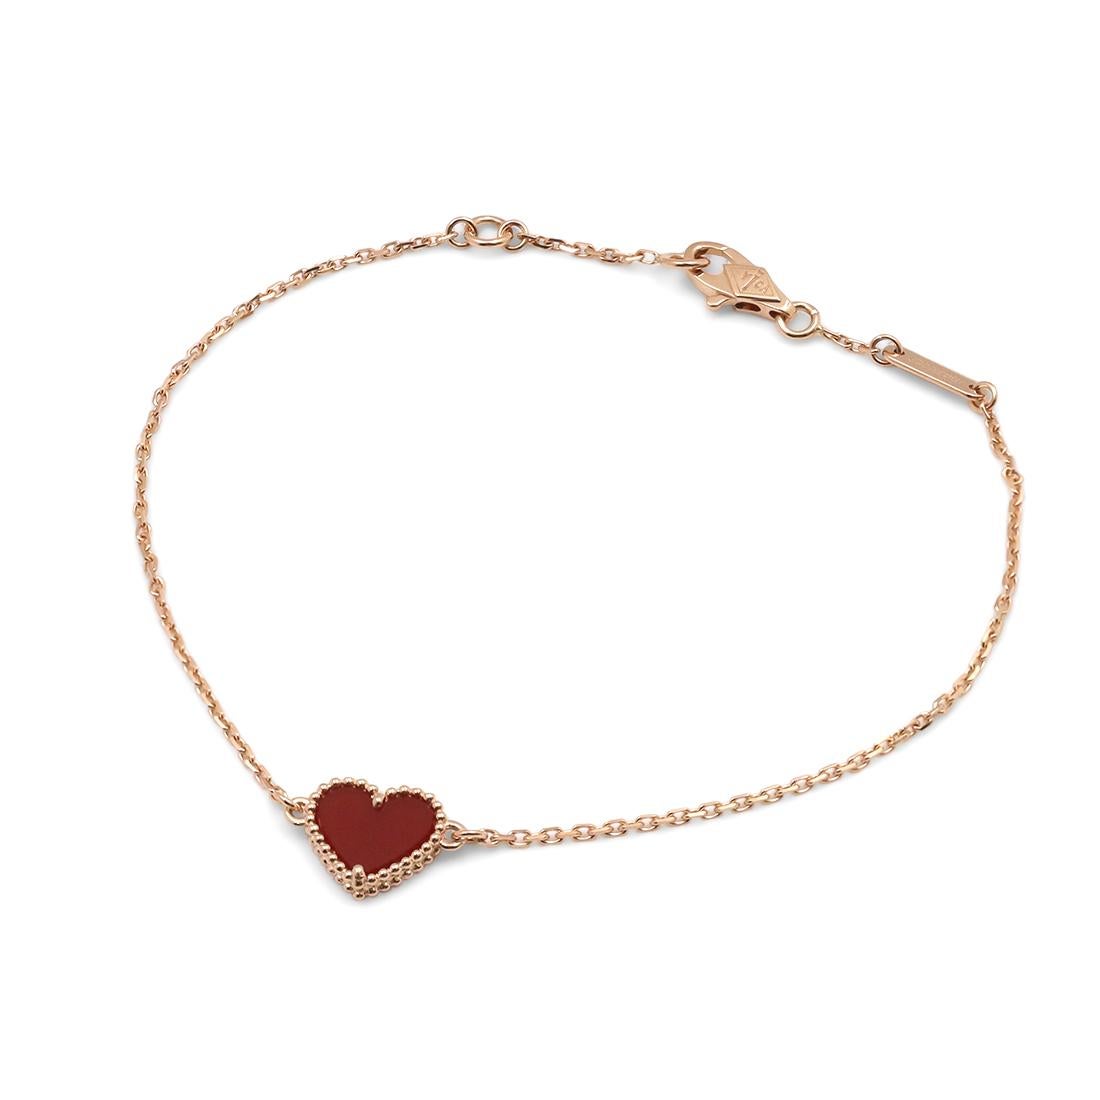 Authentic Van Cleef & Arpels 'Sweet Alhambra Heart' bracelet crafted in 18 karat rose gold features a single carnelian heart motif. Signed VCA, 750, with serial number. Will fit up to a 7 inch wrist. The bracelet is presented with the original